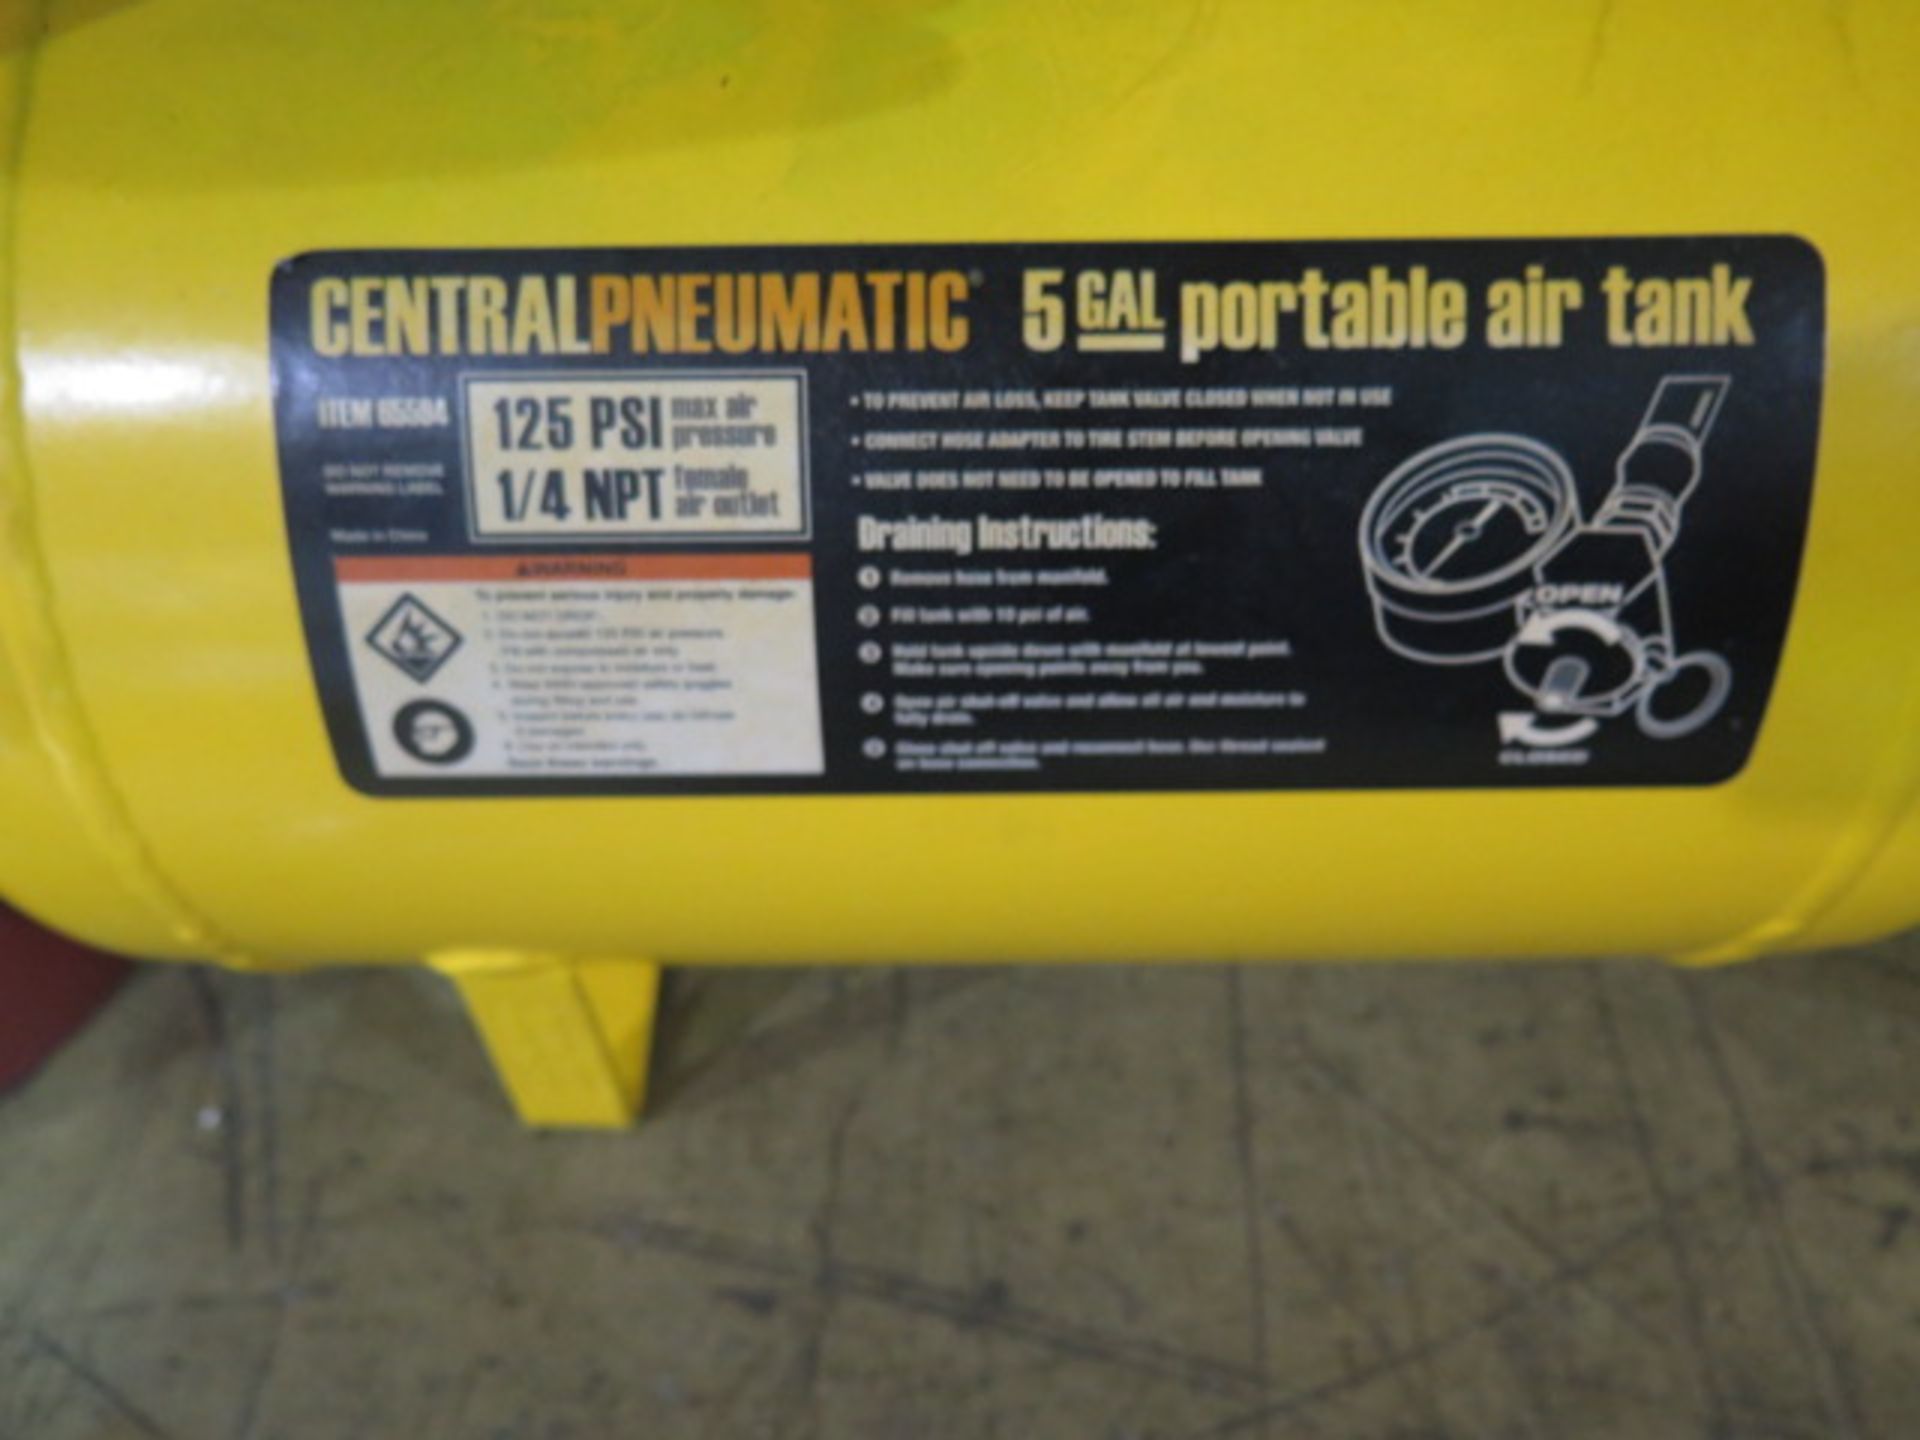 5 Gallon Portable Air Tanks (2) (SOLD AS-IS - NO WARRANTY) - Image 3 of 3